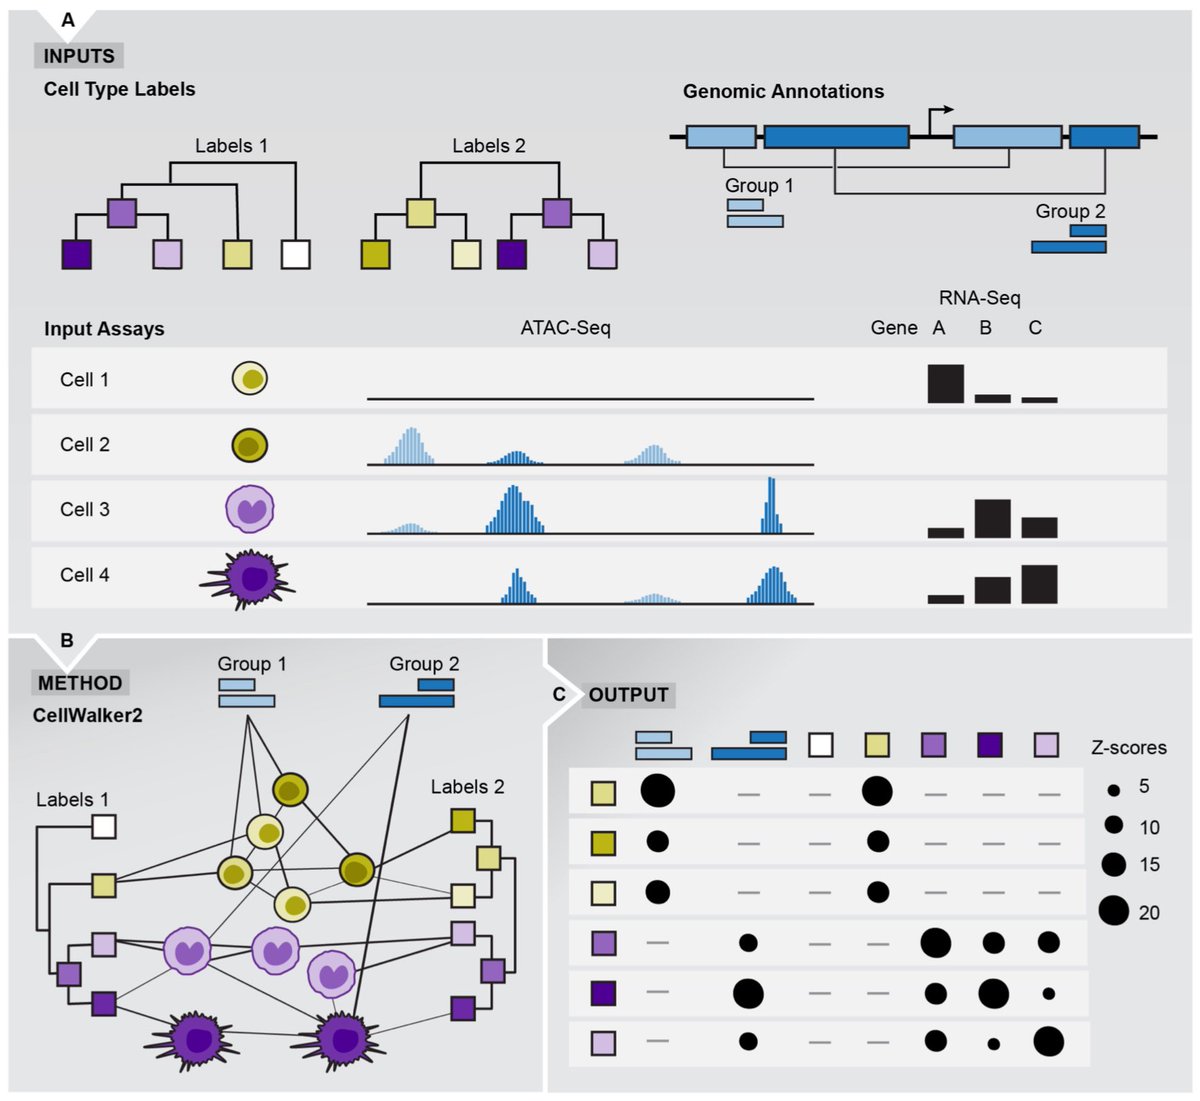 CellWalker2: multi-omic discovery of hierarchical cell type relationships and their associations with genomic annotations biorxiv.org/content/10.110…